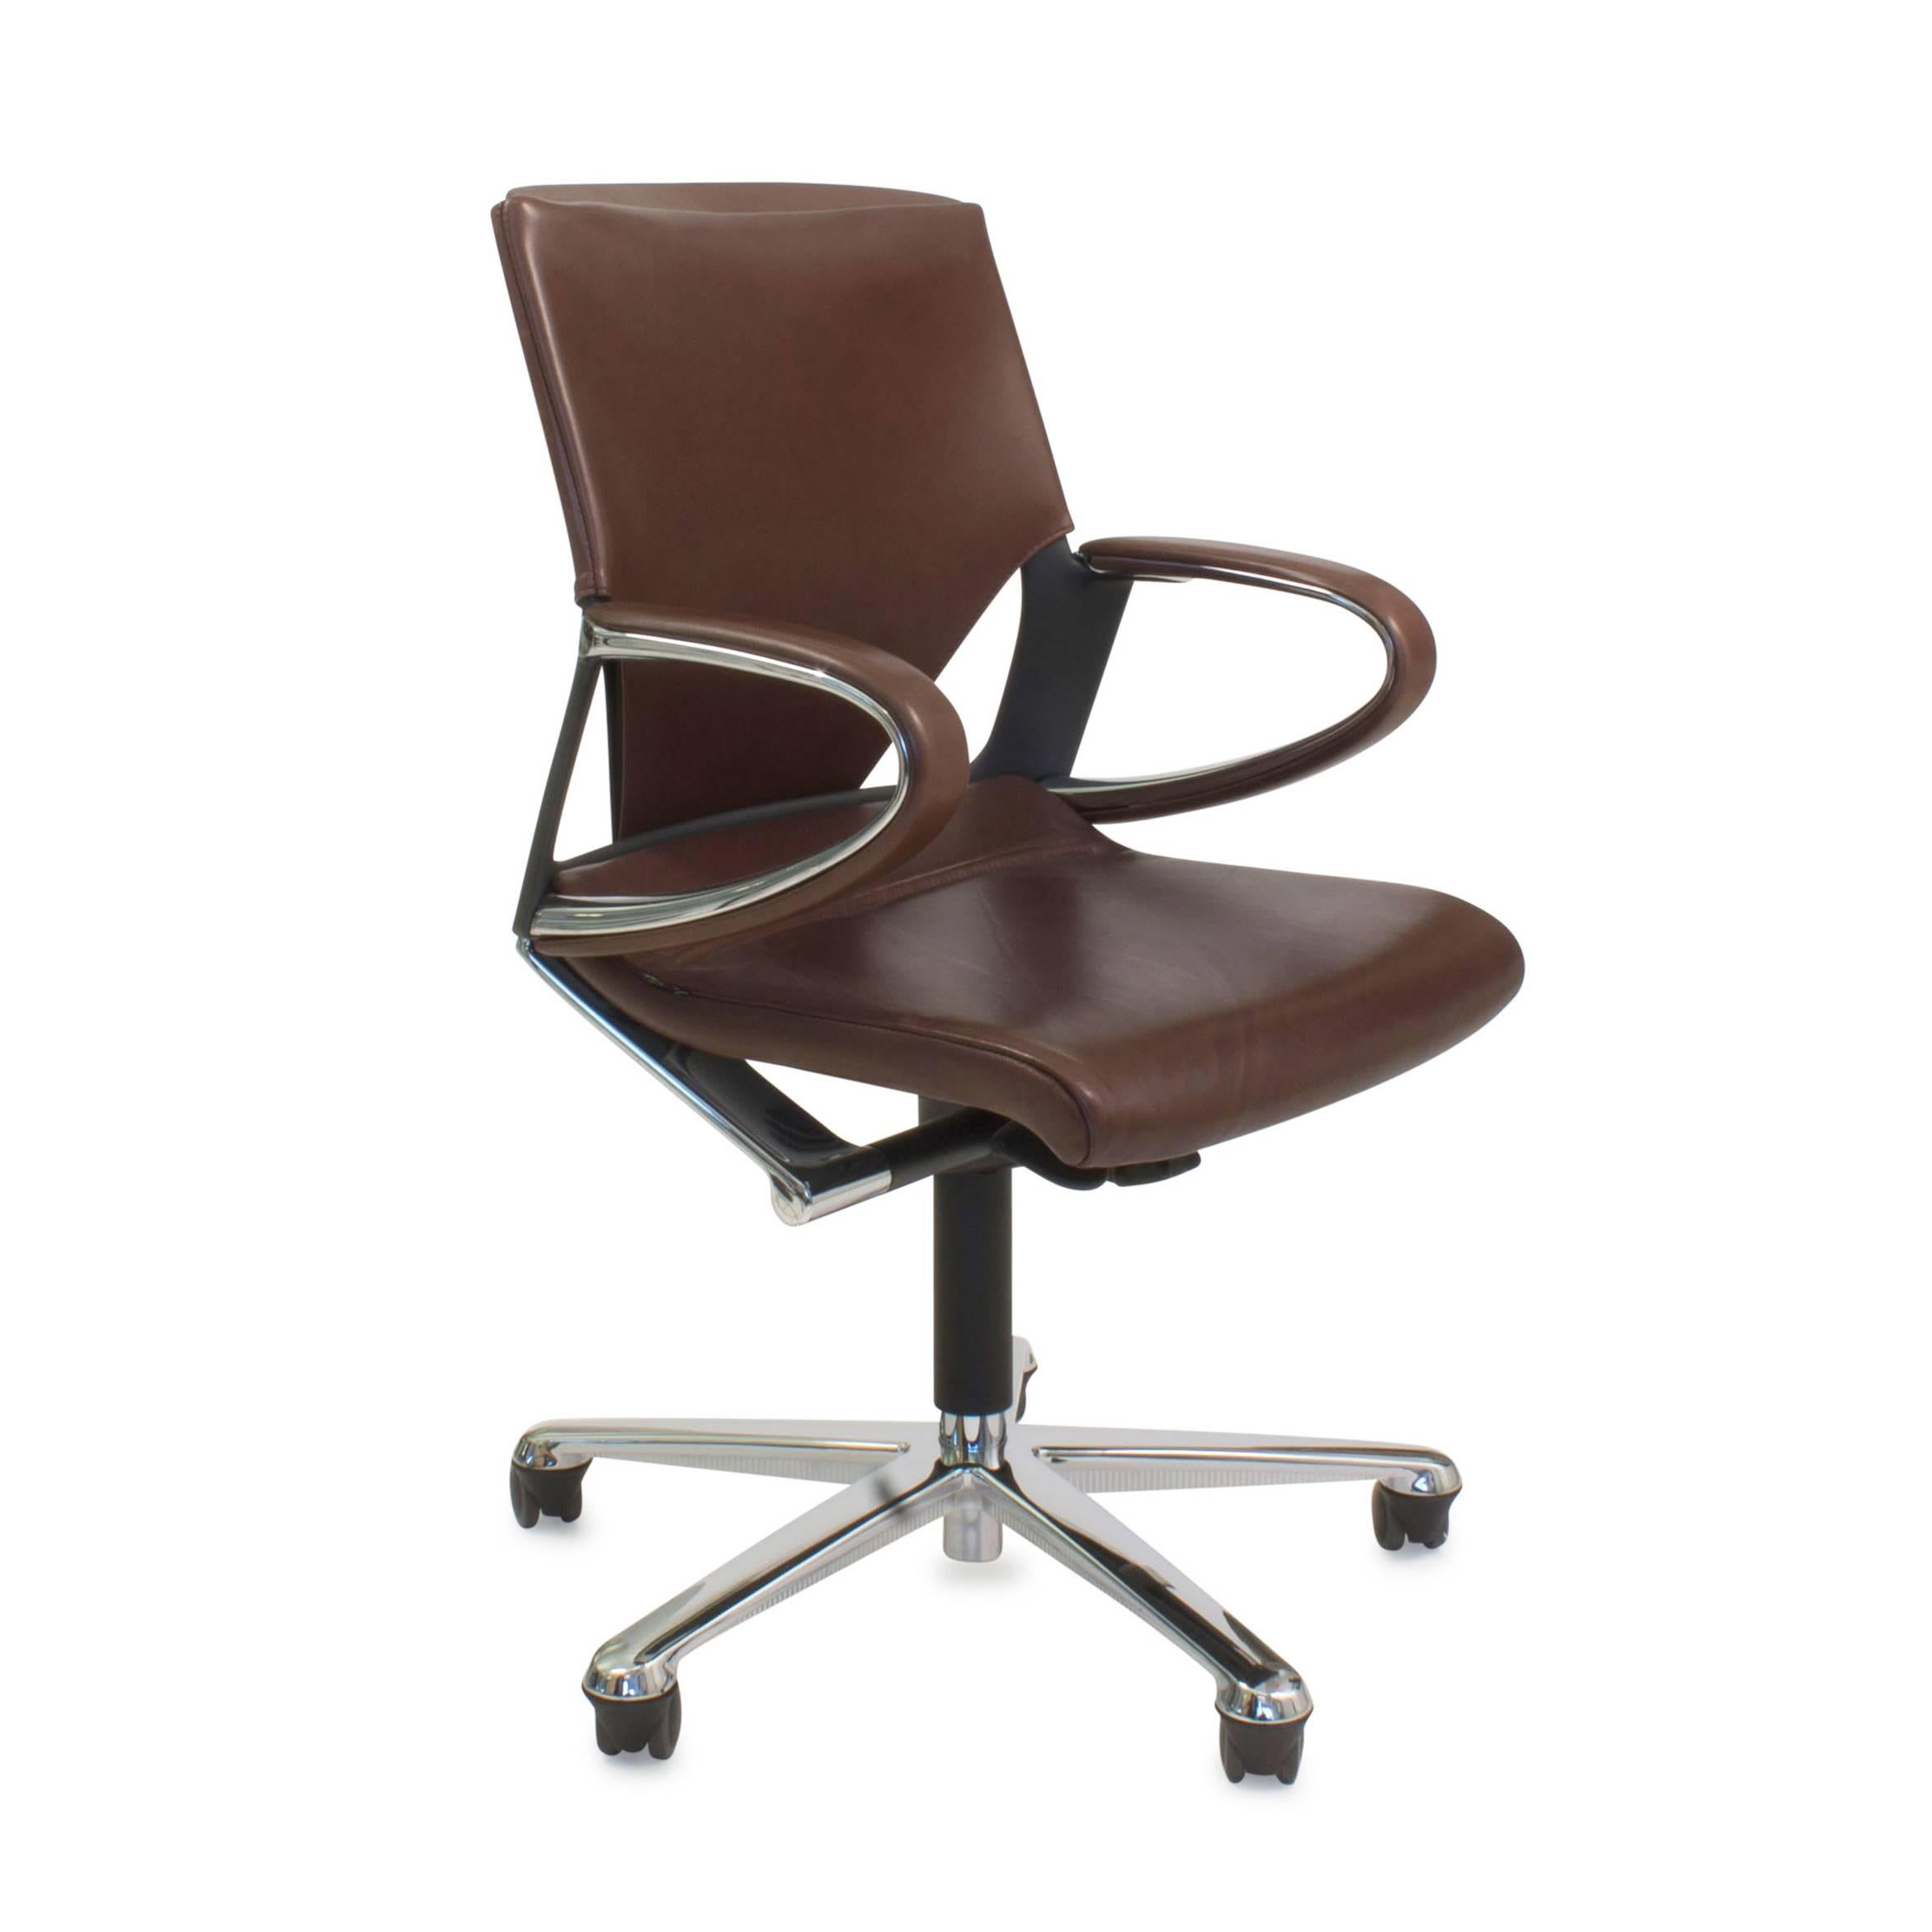 An innovative look. Suitably prestigious. Excellent comfort. What area says more about corporate culture than executive offices? Which is why prestige and constant values enjoy high priority in this case? The Modus medium range offers a wider seat